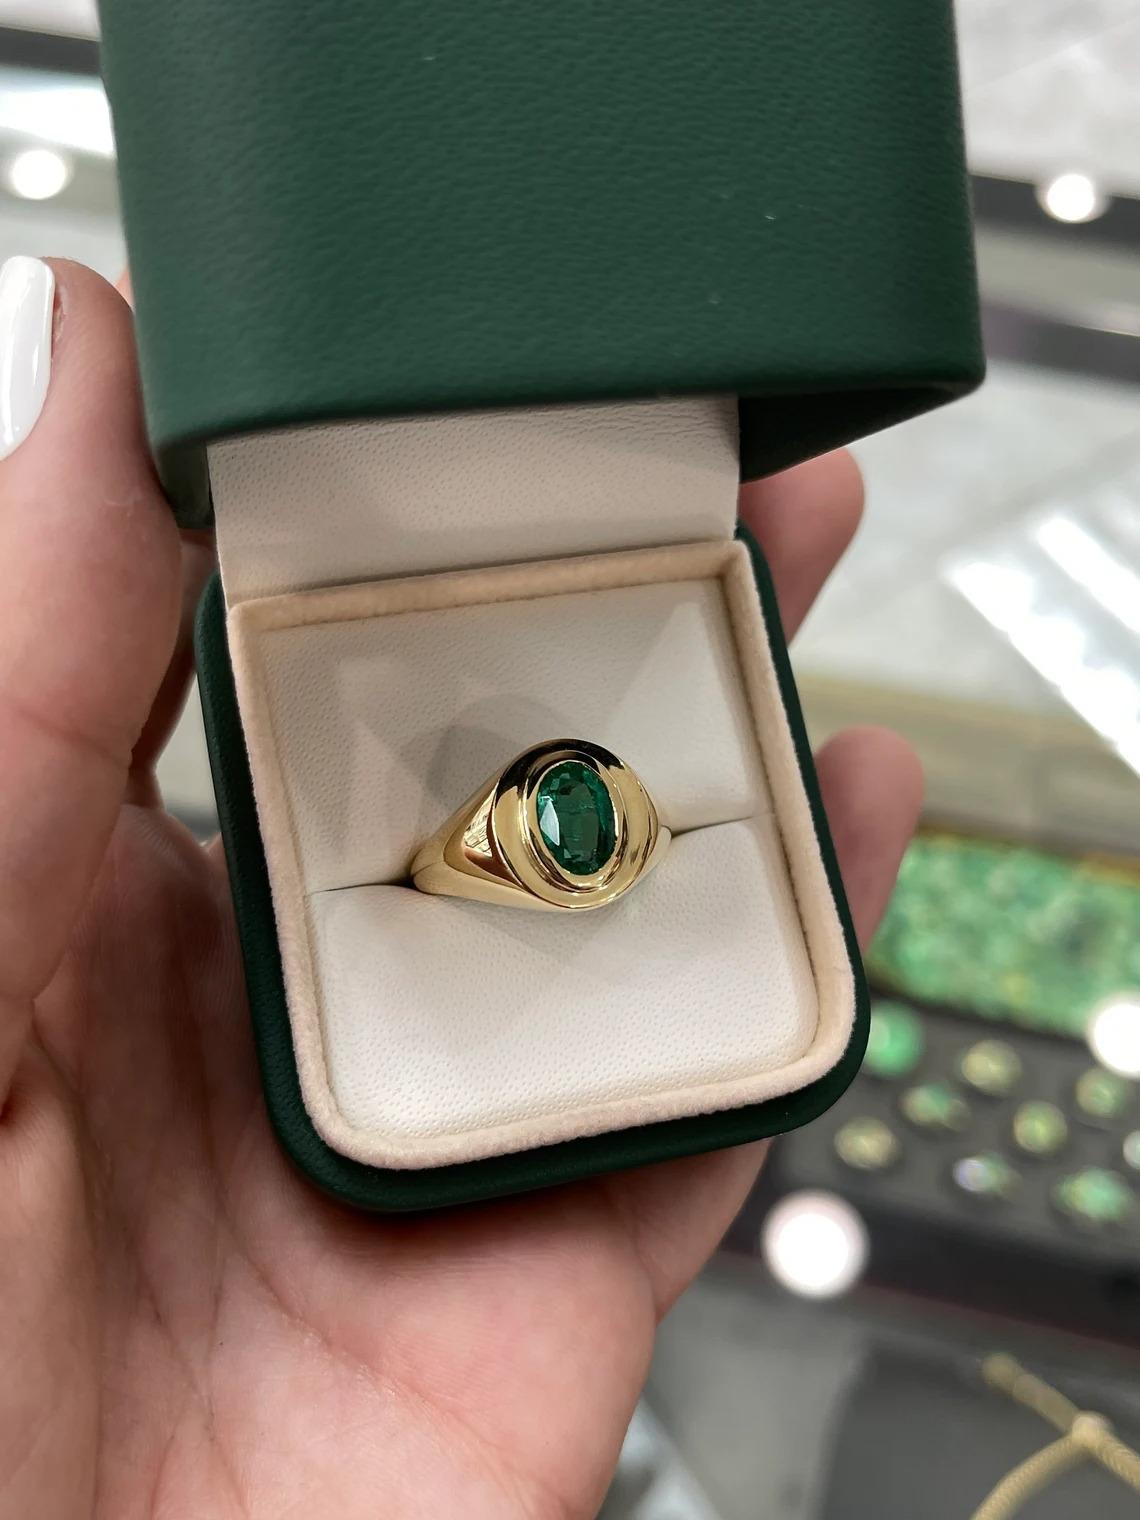 Top AAA 1.55ct 18K Natural Emerald-Oval Cut Solitaire Solid Gold Men's Ring In New Condition For Sale In Jupiter, FL